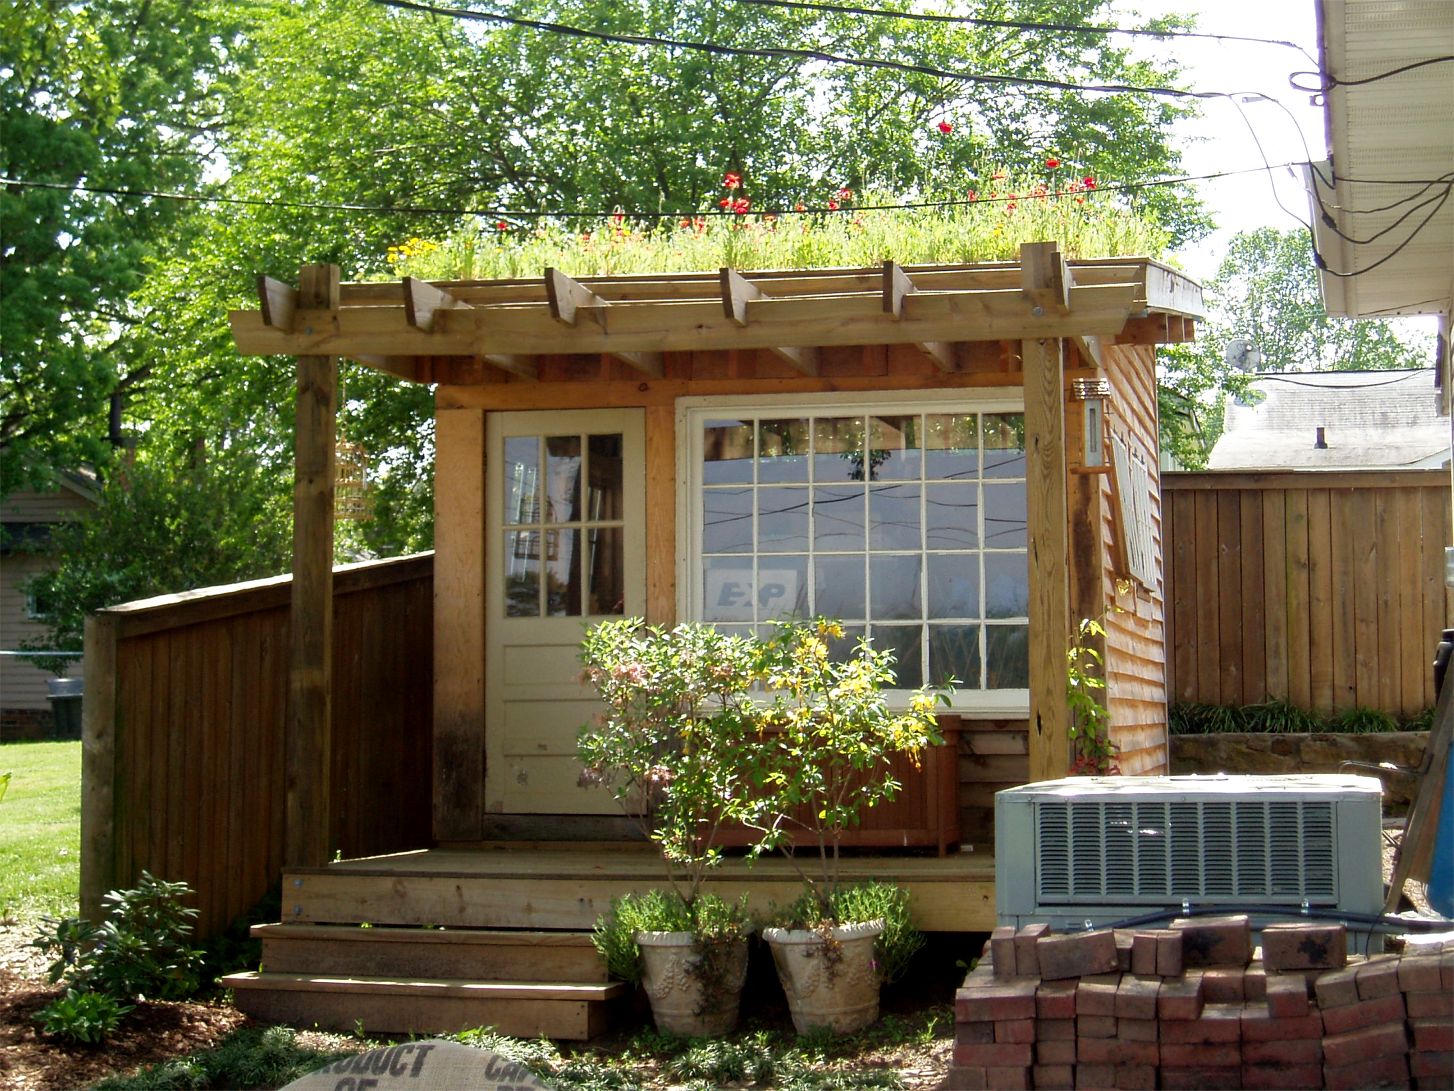 raleigh small green roofs workshop - greenroofs.com